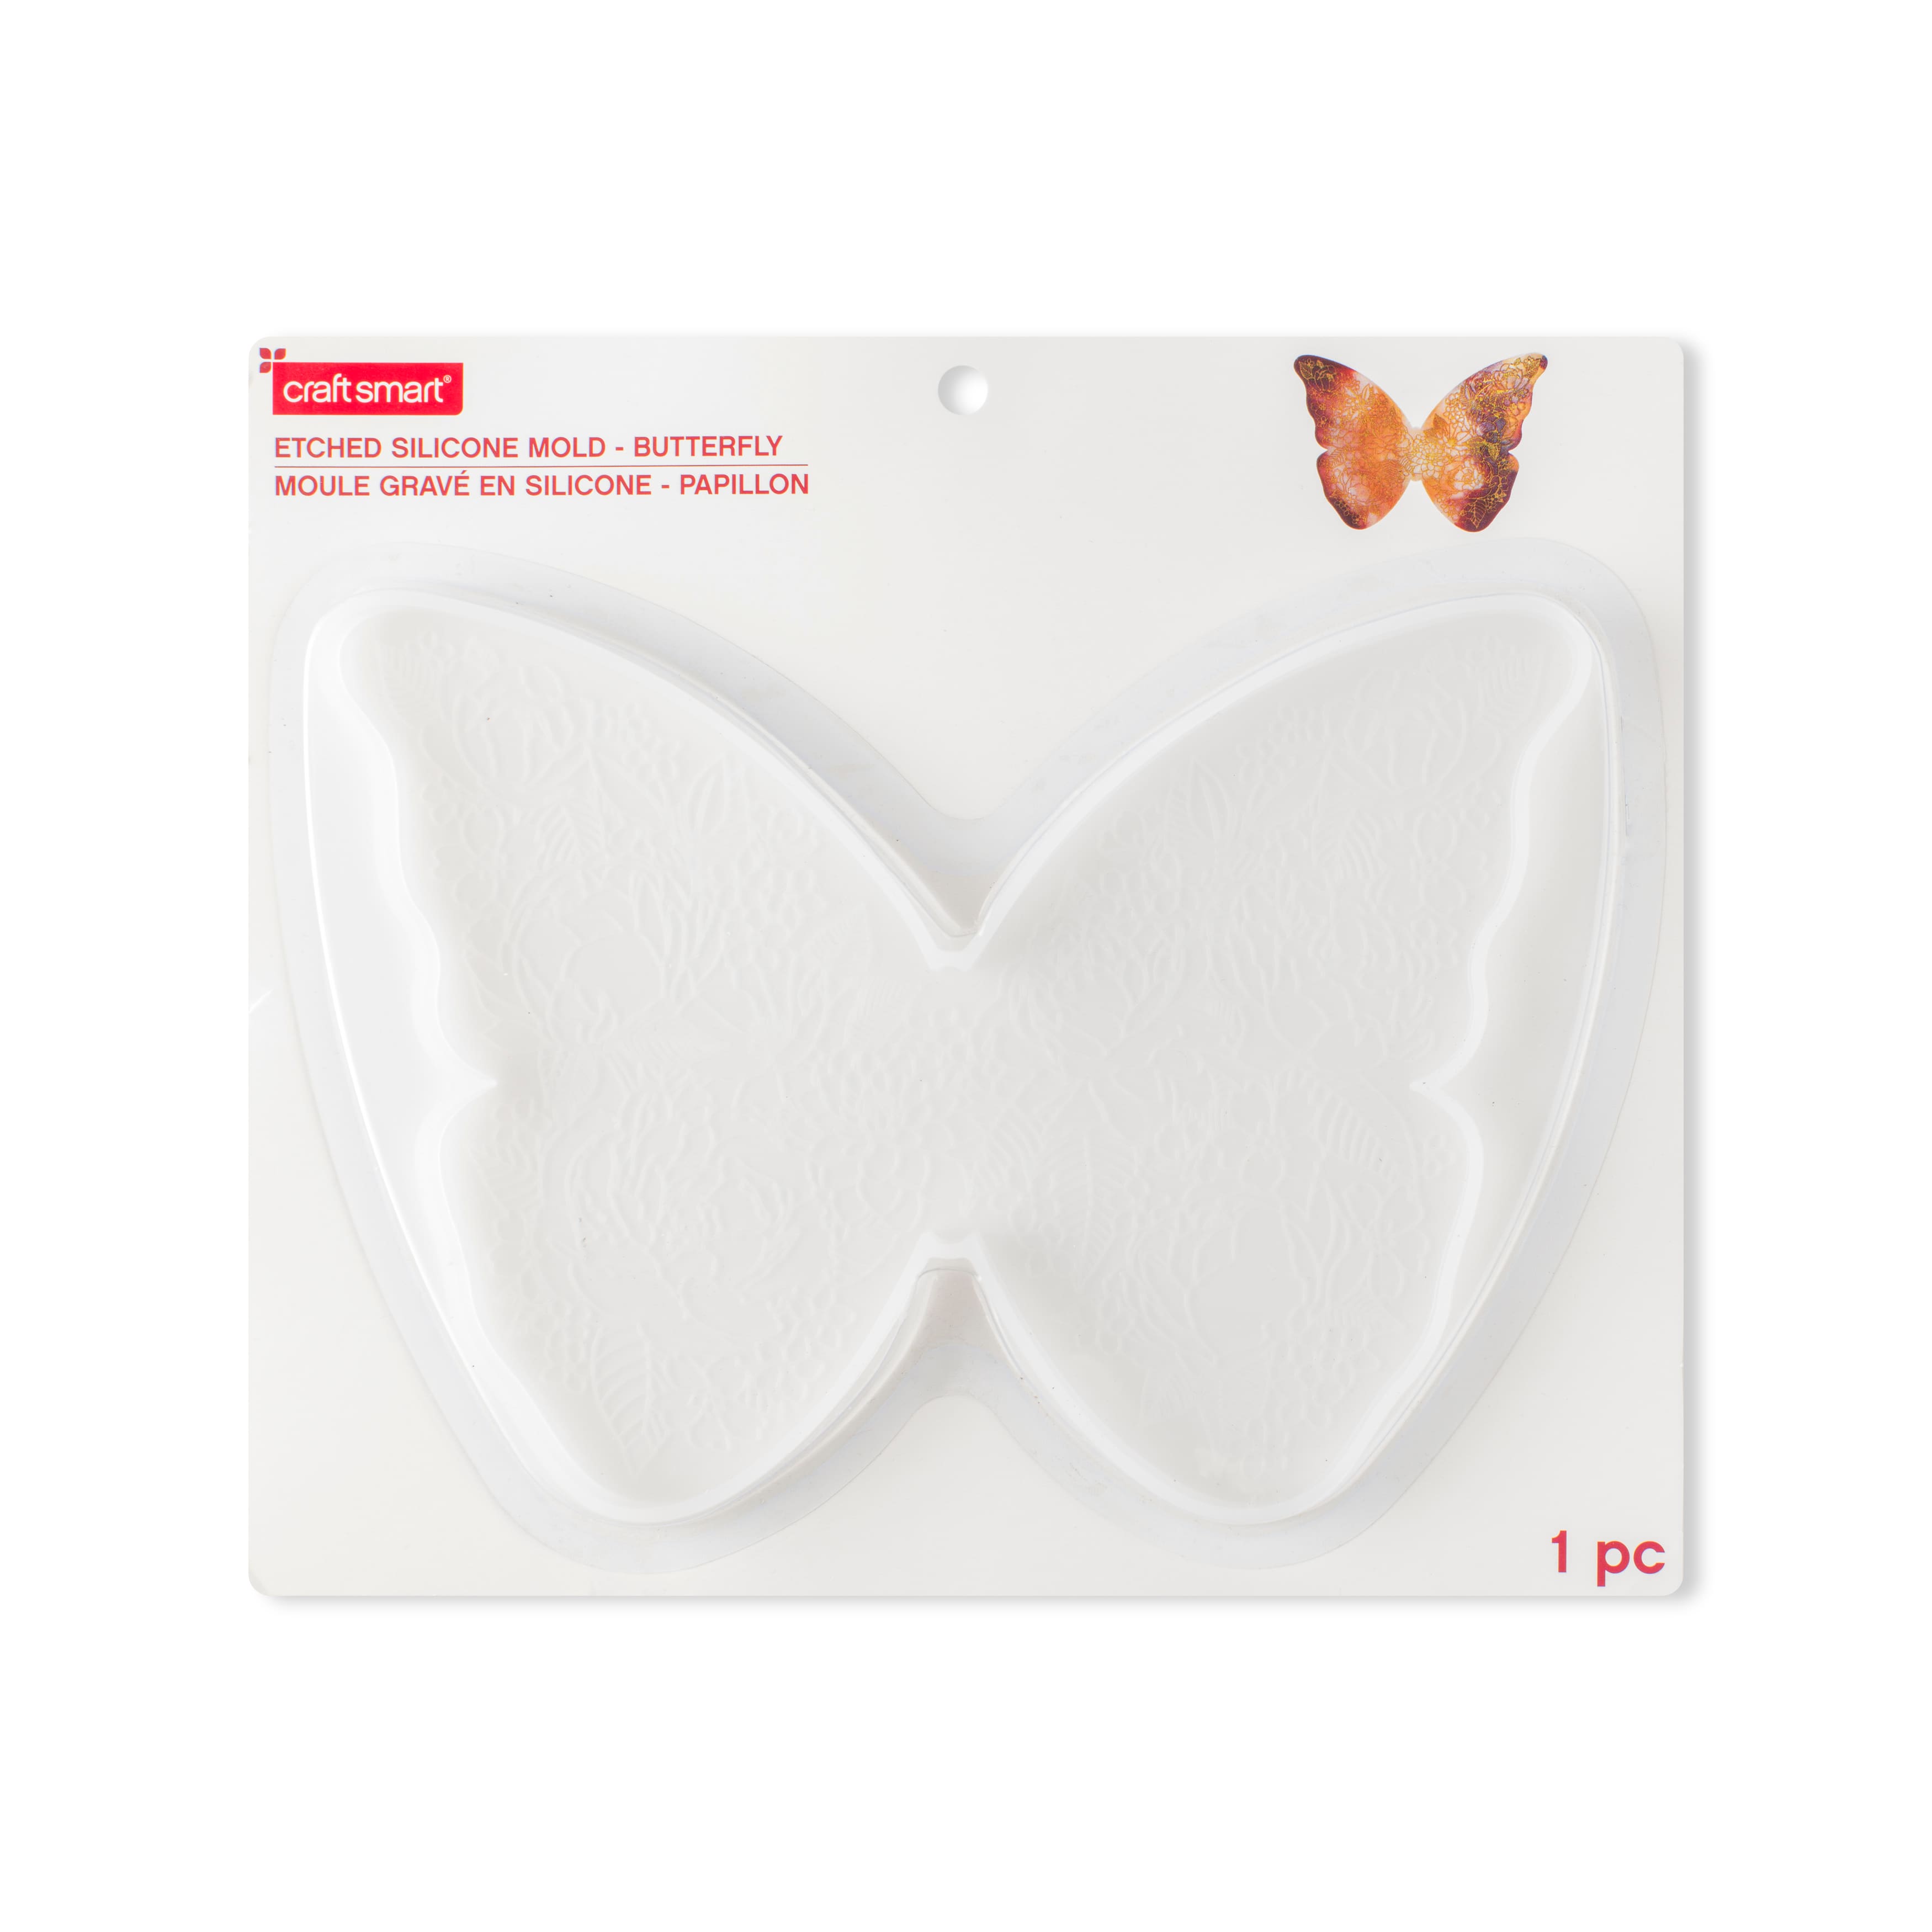 Butterfly Etched Silicone Mold by Craft Smart® | Michaels